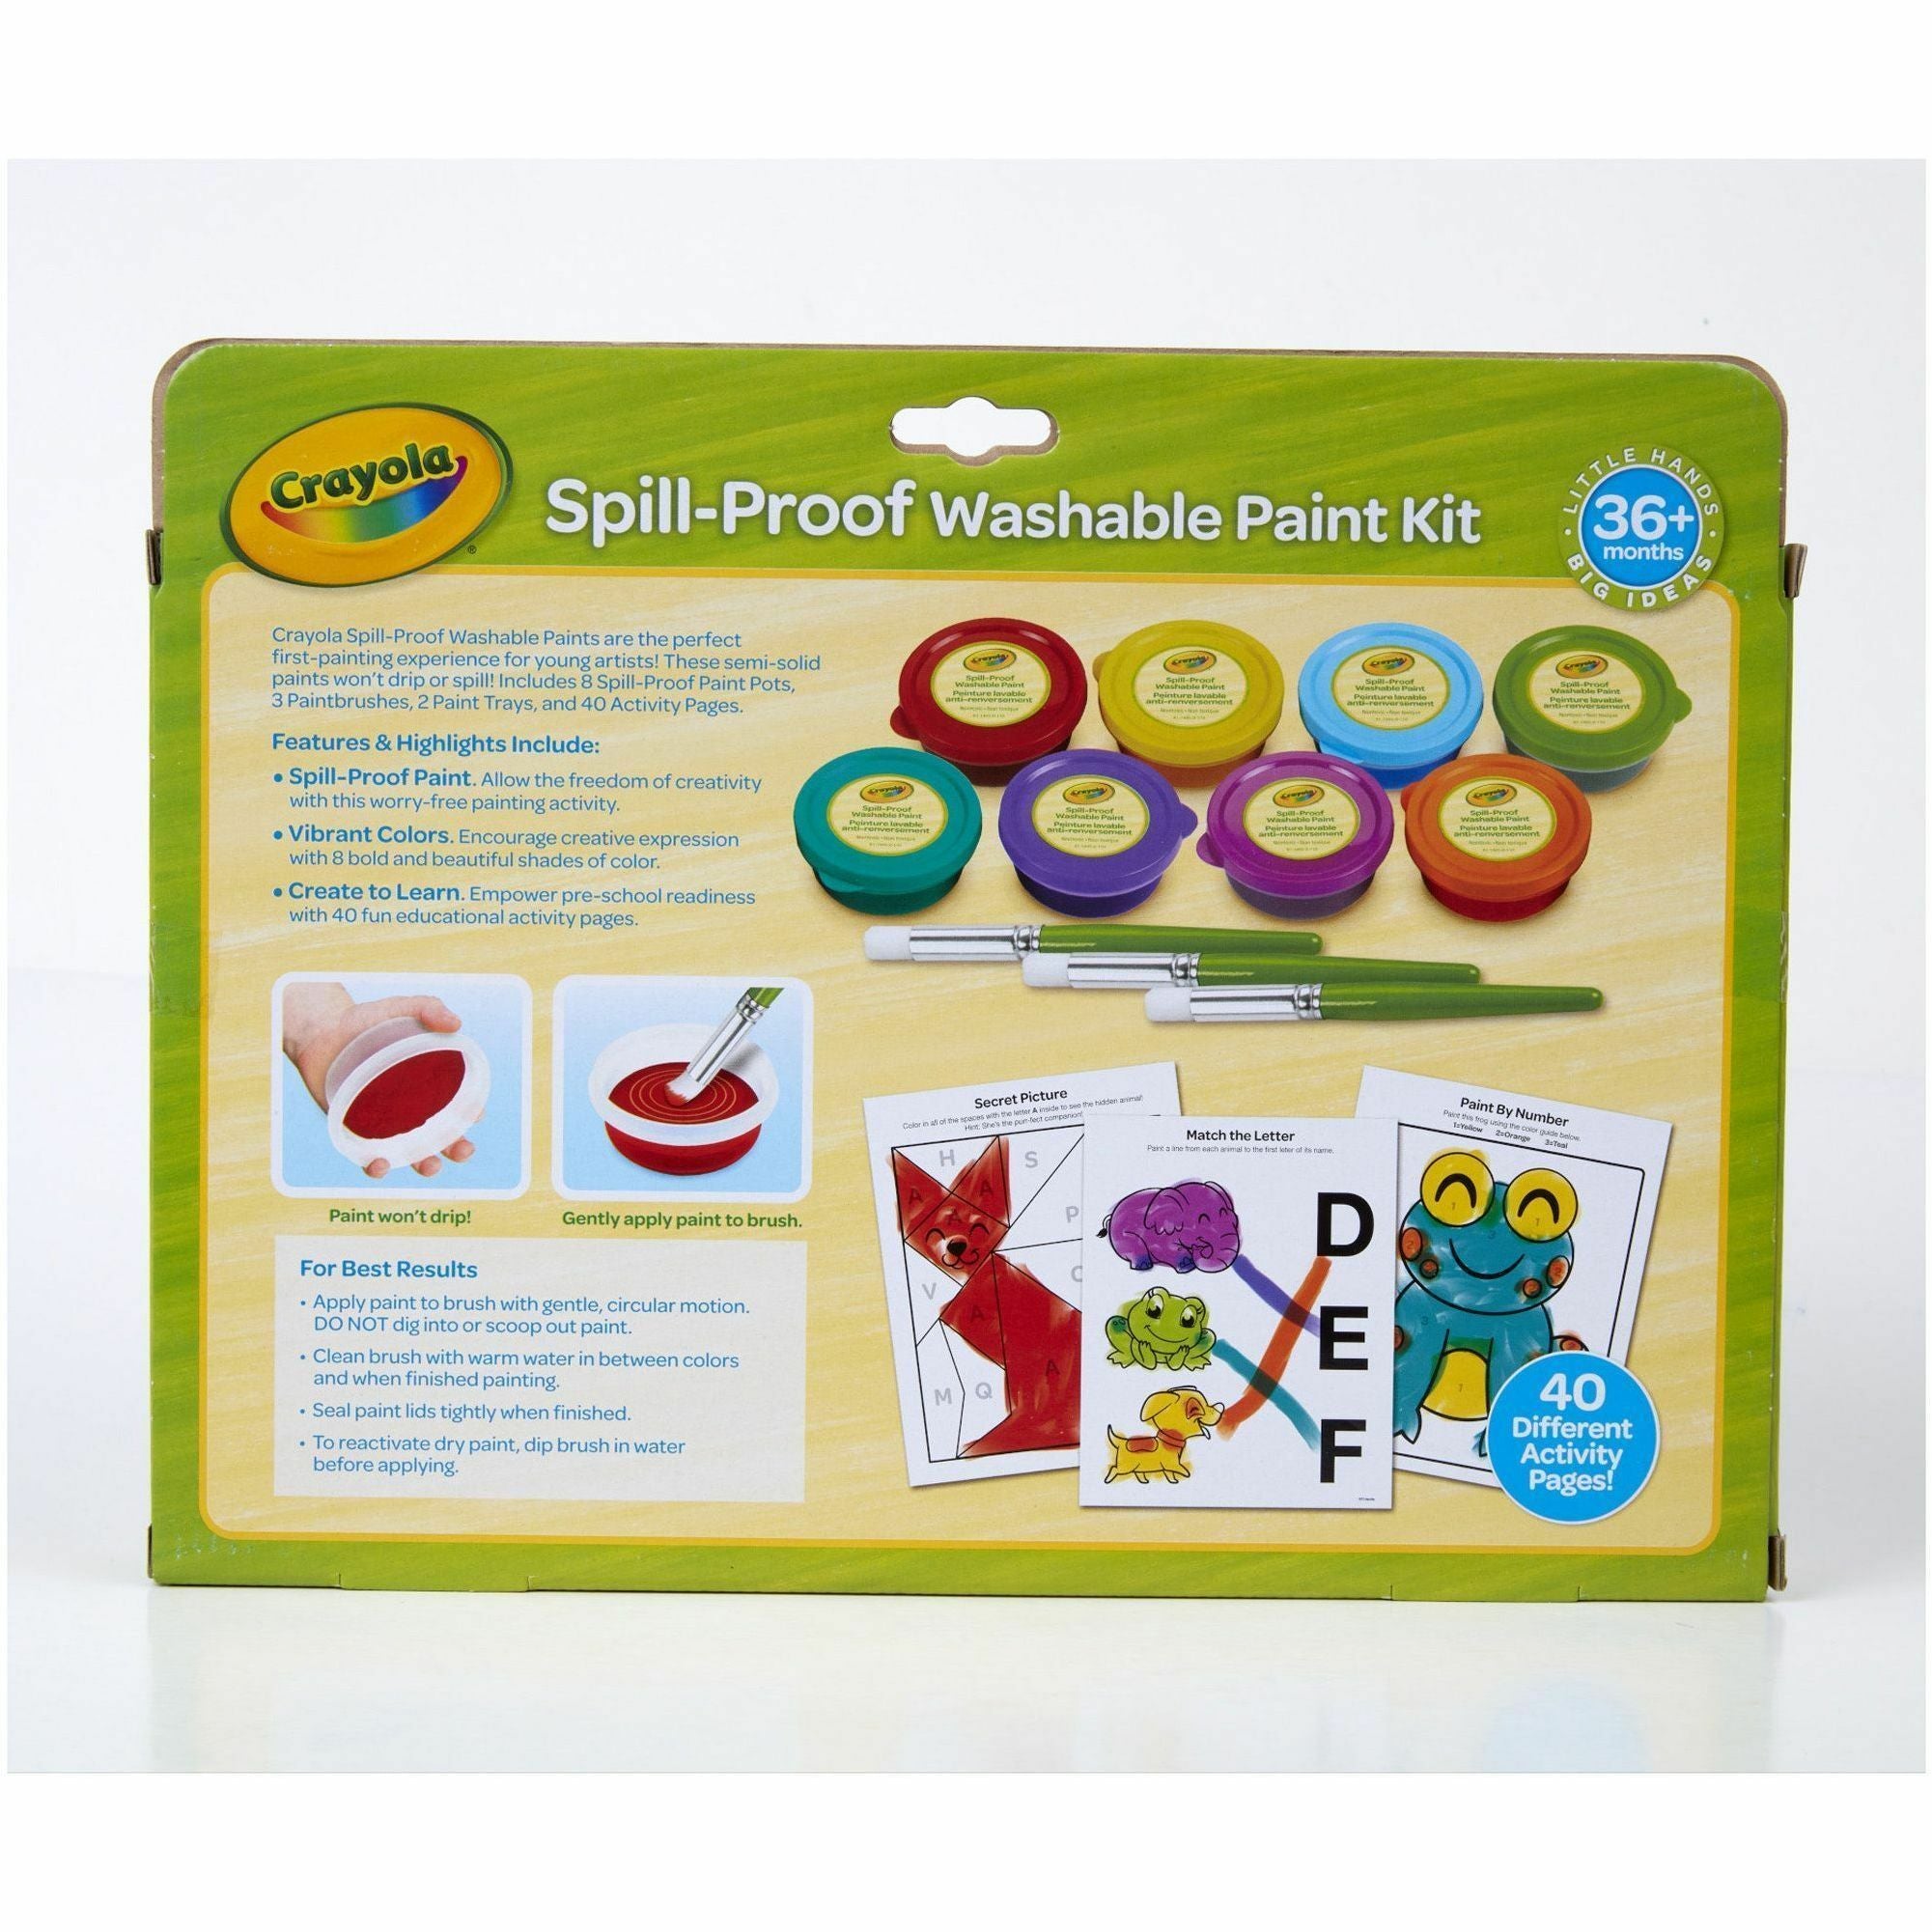 crayola-spill-proof-washable-paint-set-art-craft-fun-and-learning-recommended-for-3-year-1-kit_cyo811518 - 5